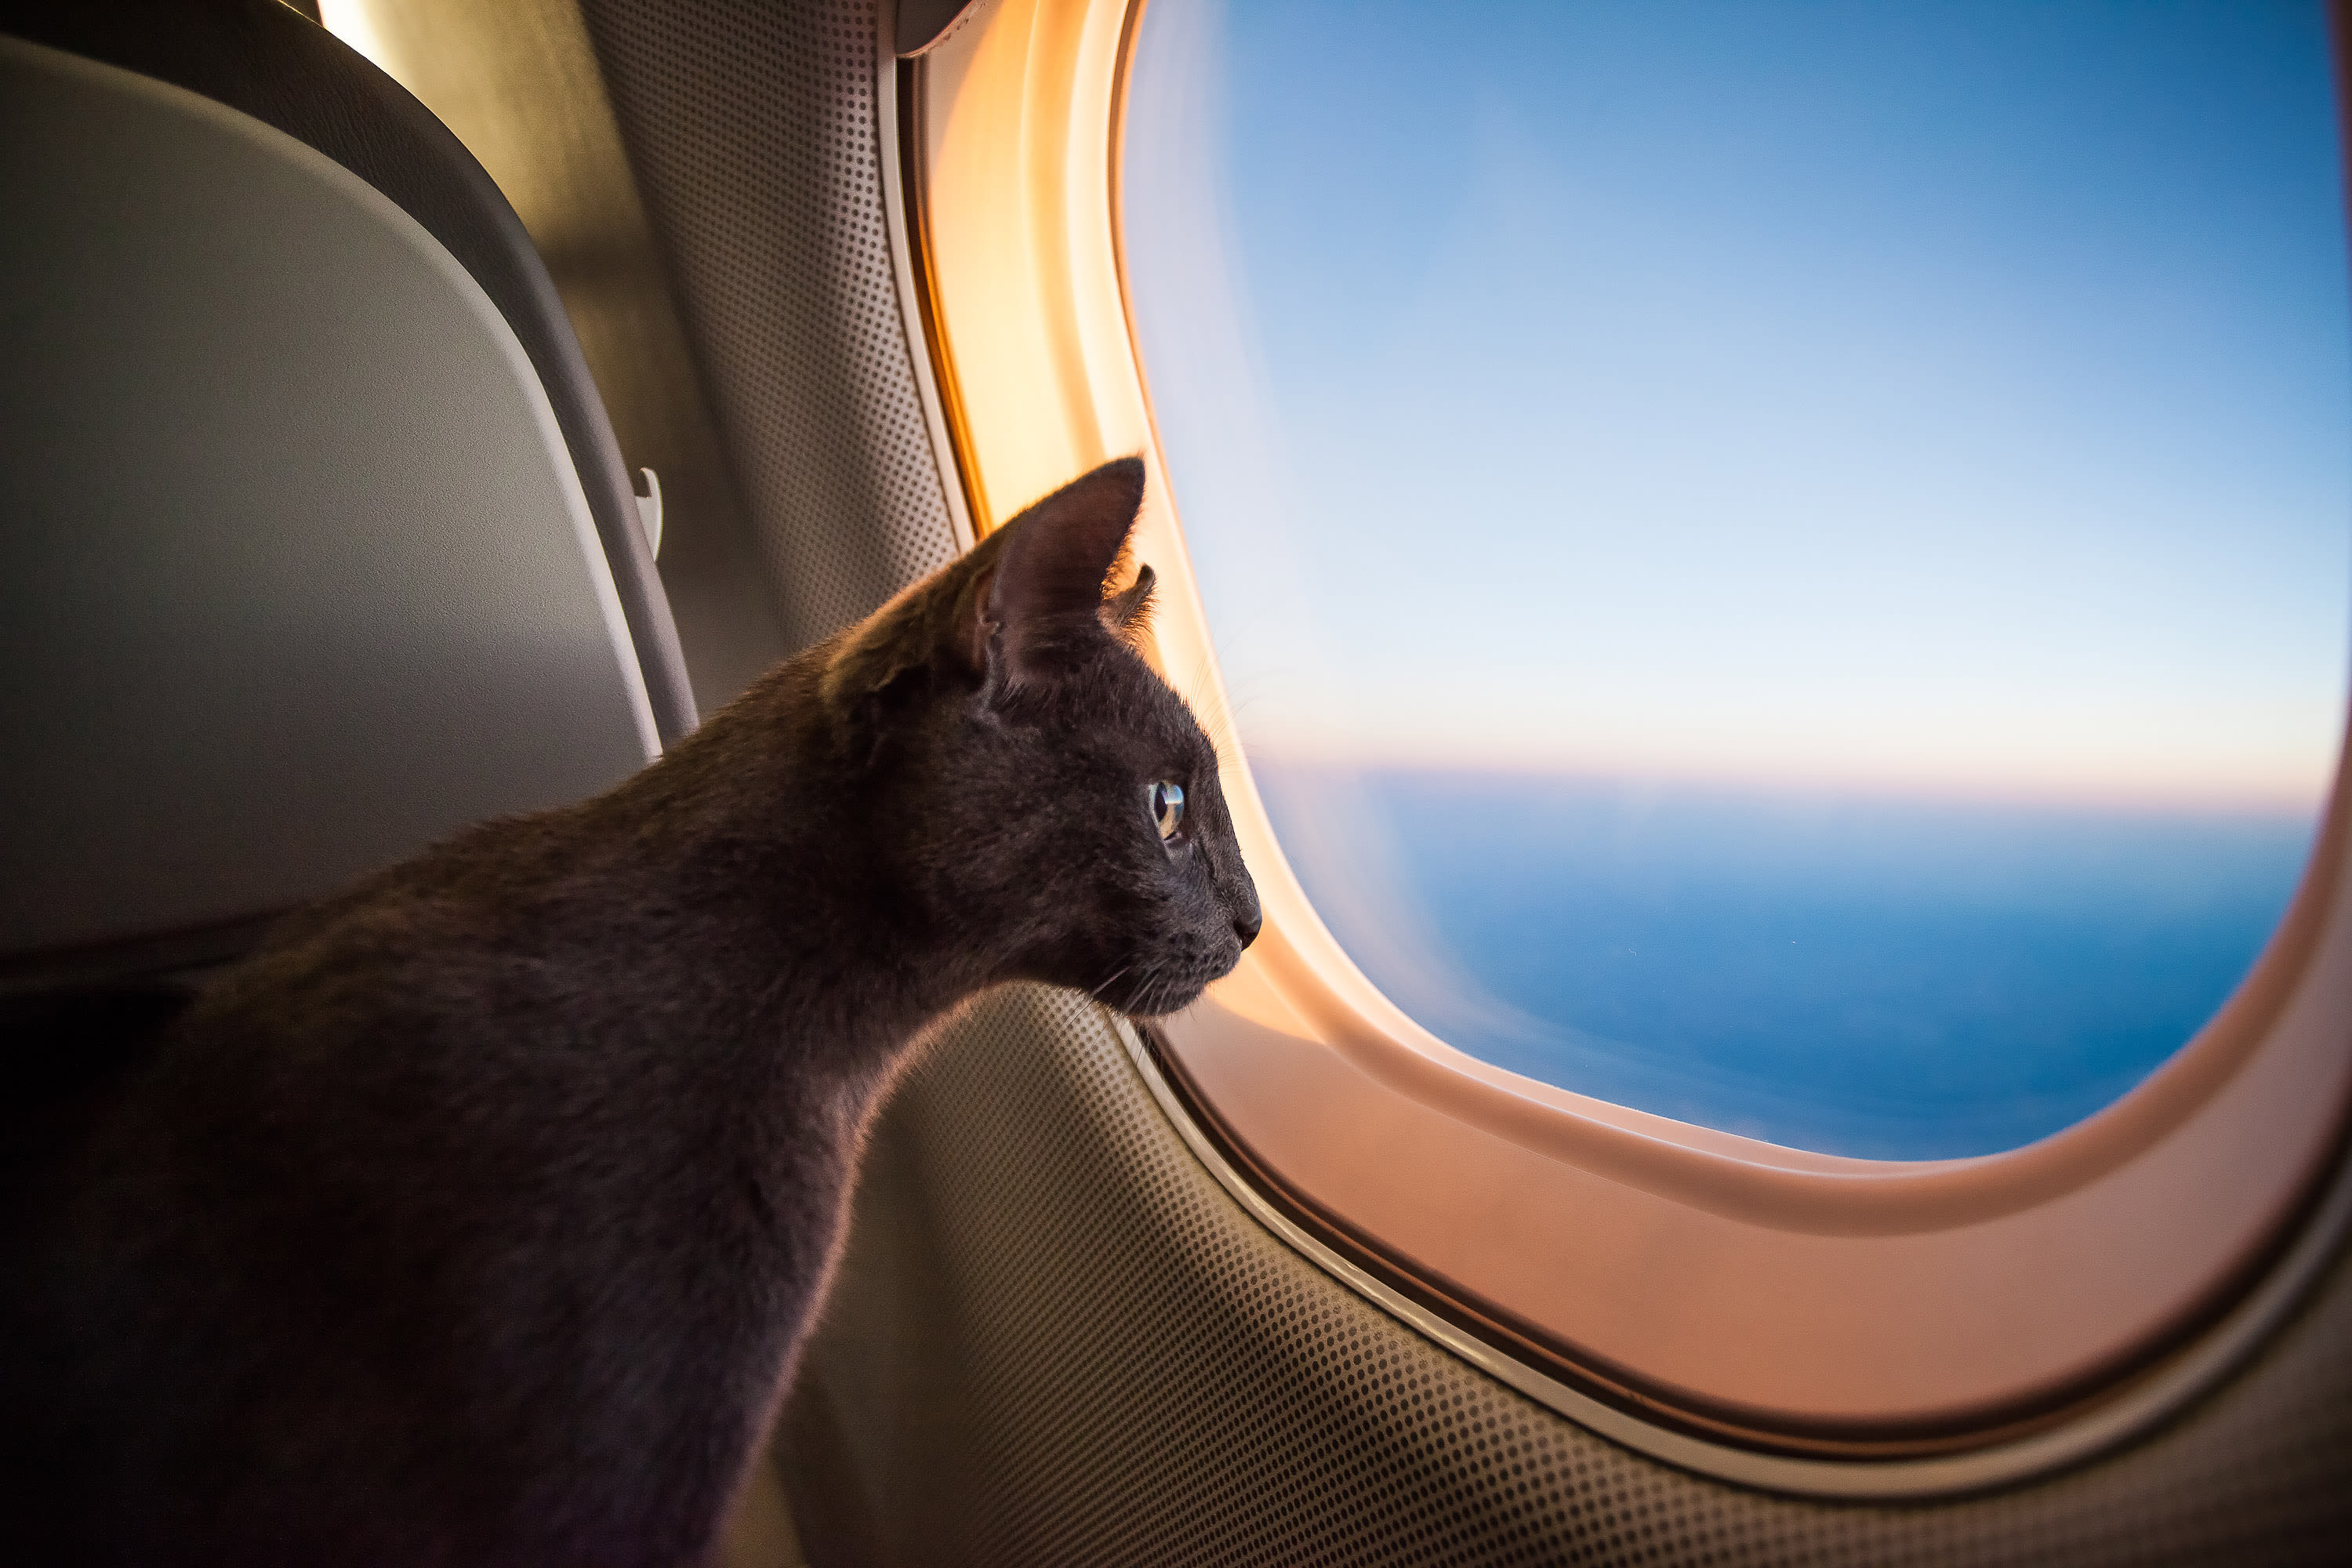 Cat's reaction to crying baby on plane delights internet